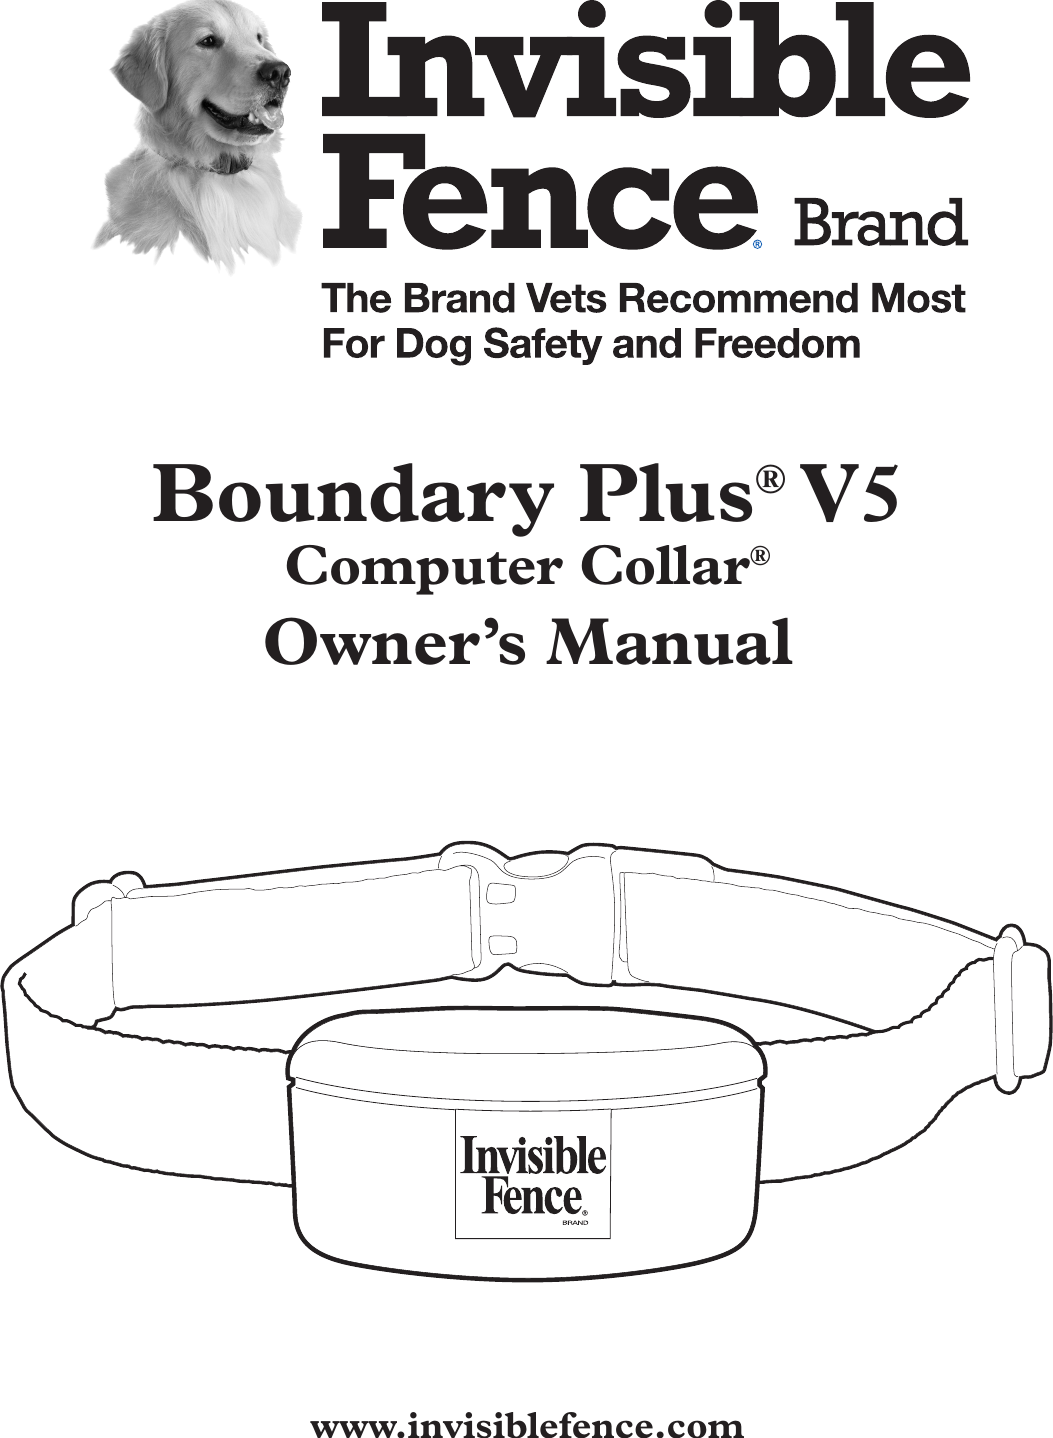 Boundary Plus® V5Computer Collar®Owner’s Manual www.invisiblefence.com